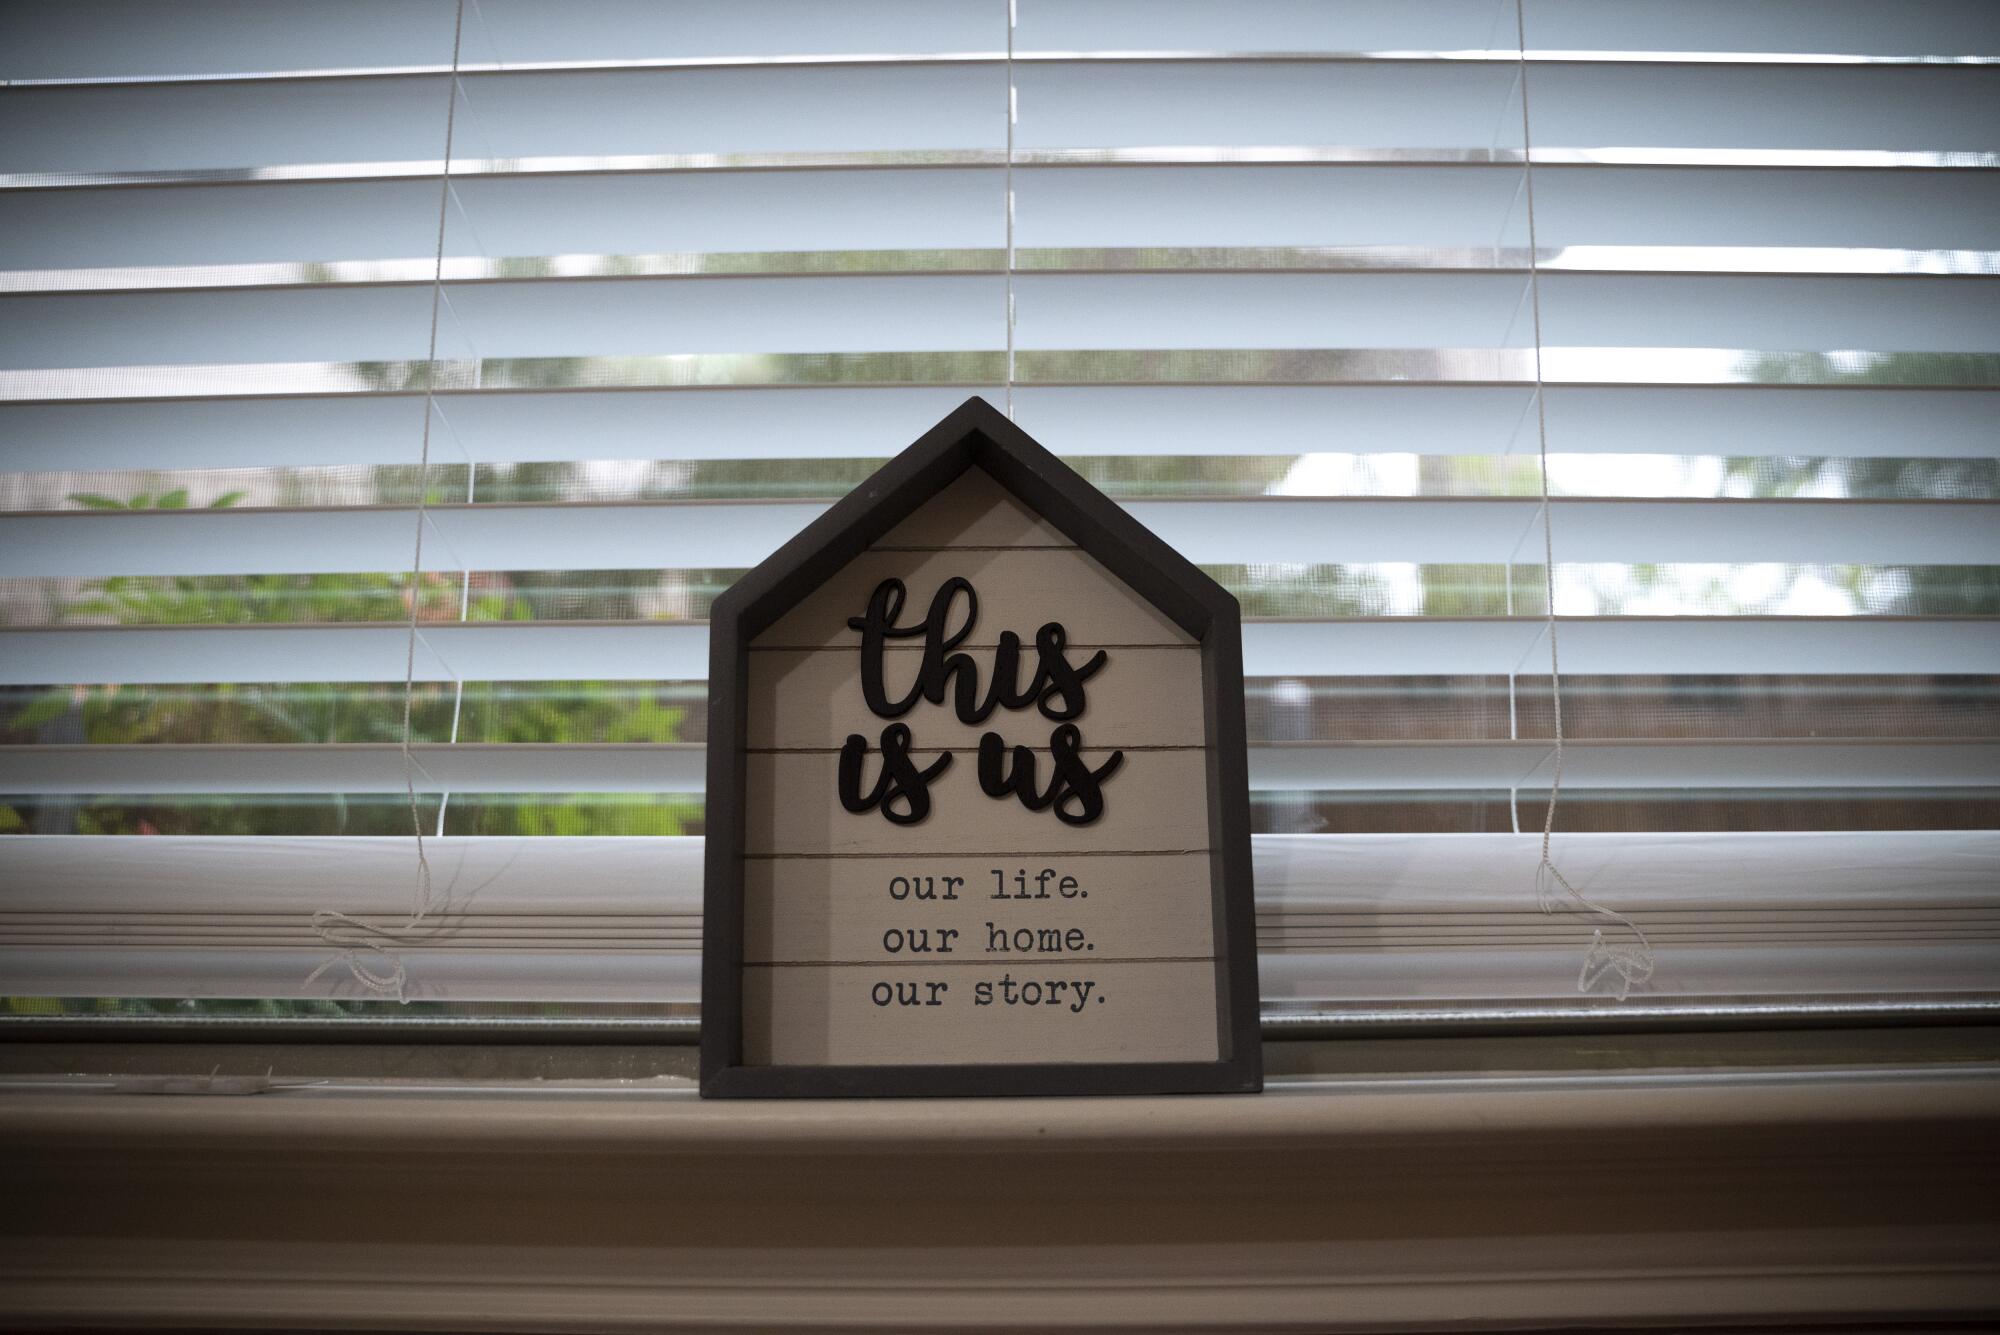 A sign inside a home says "This is us."